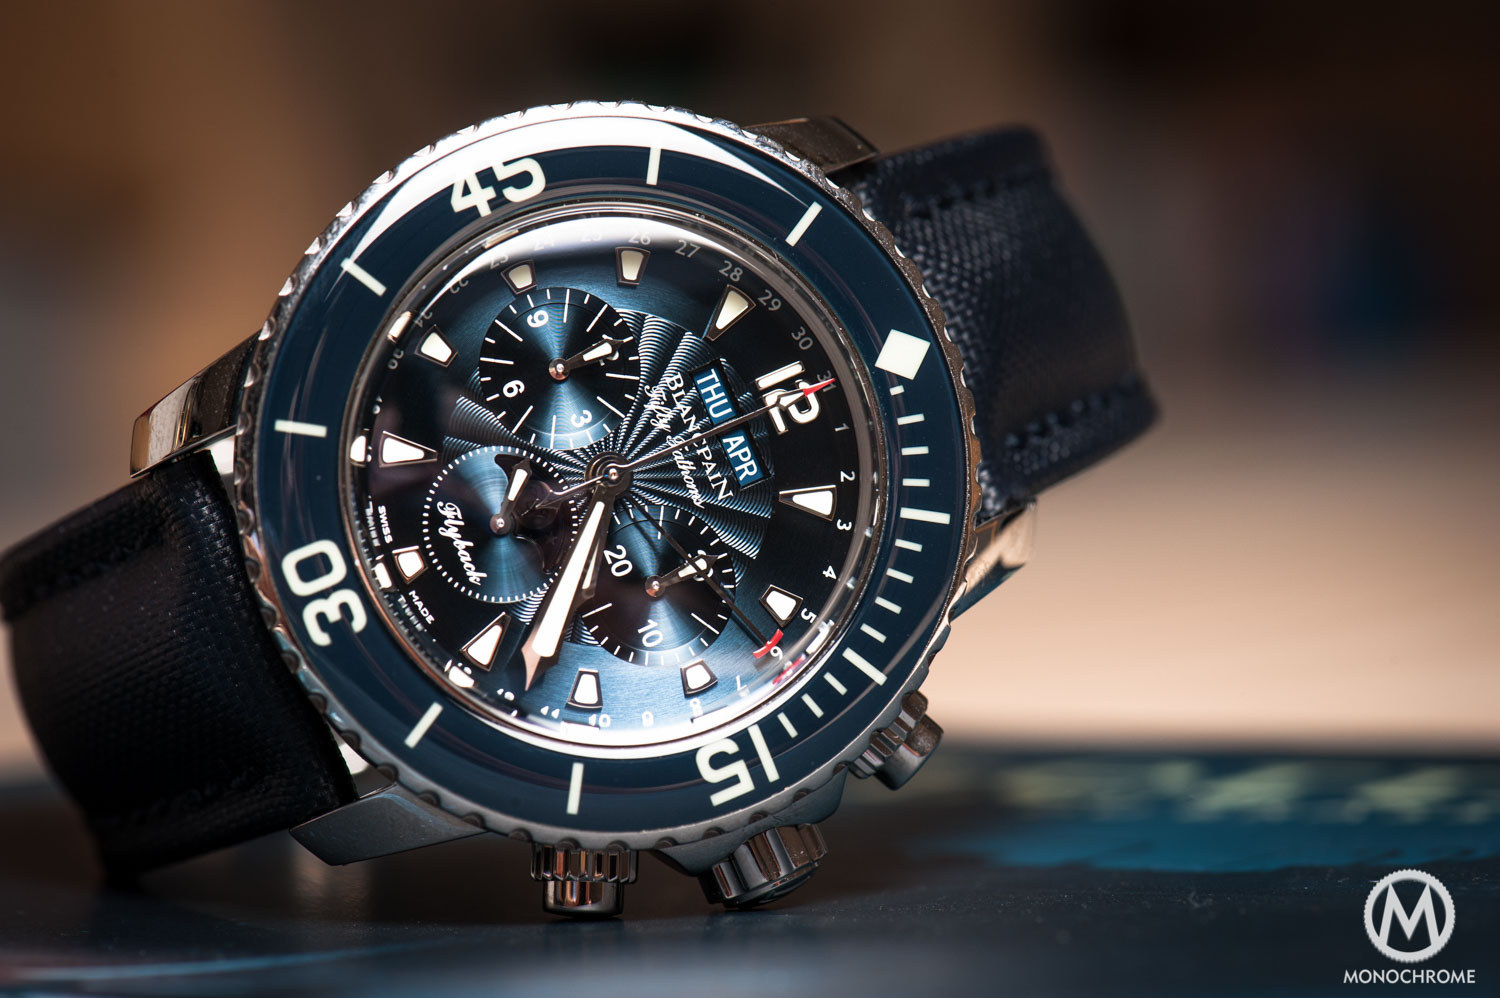 Blancpain Fifty Fathoms Chronographe Flyback Quantieme Complet